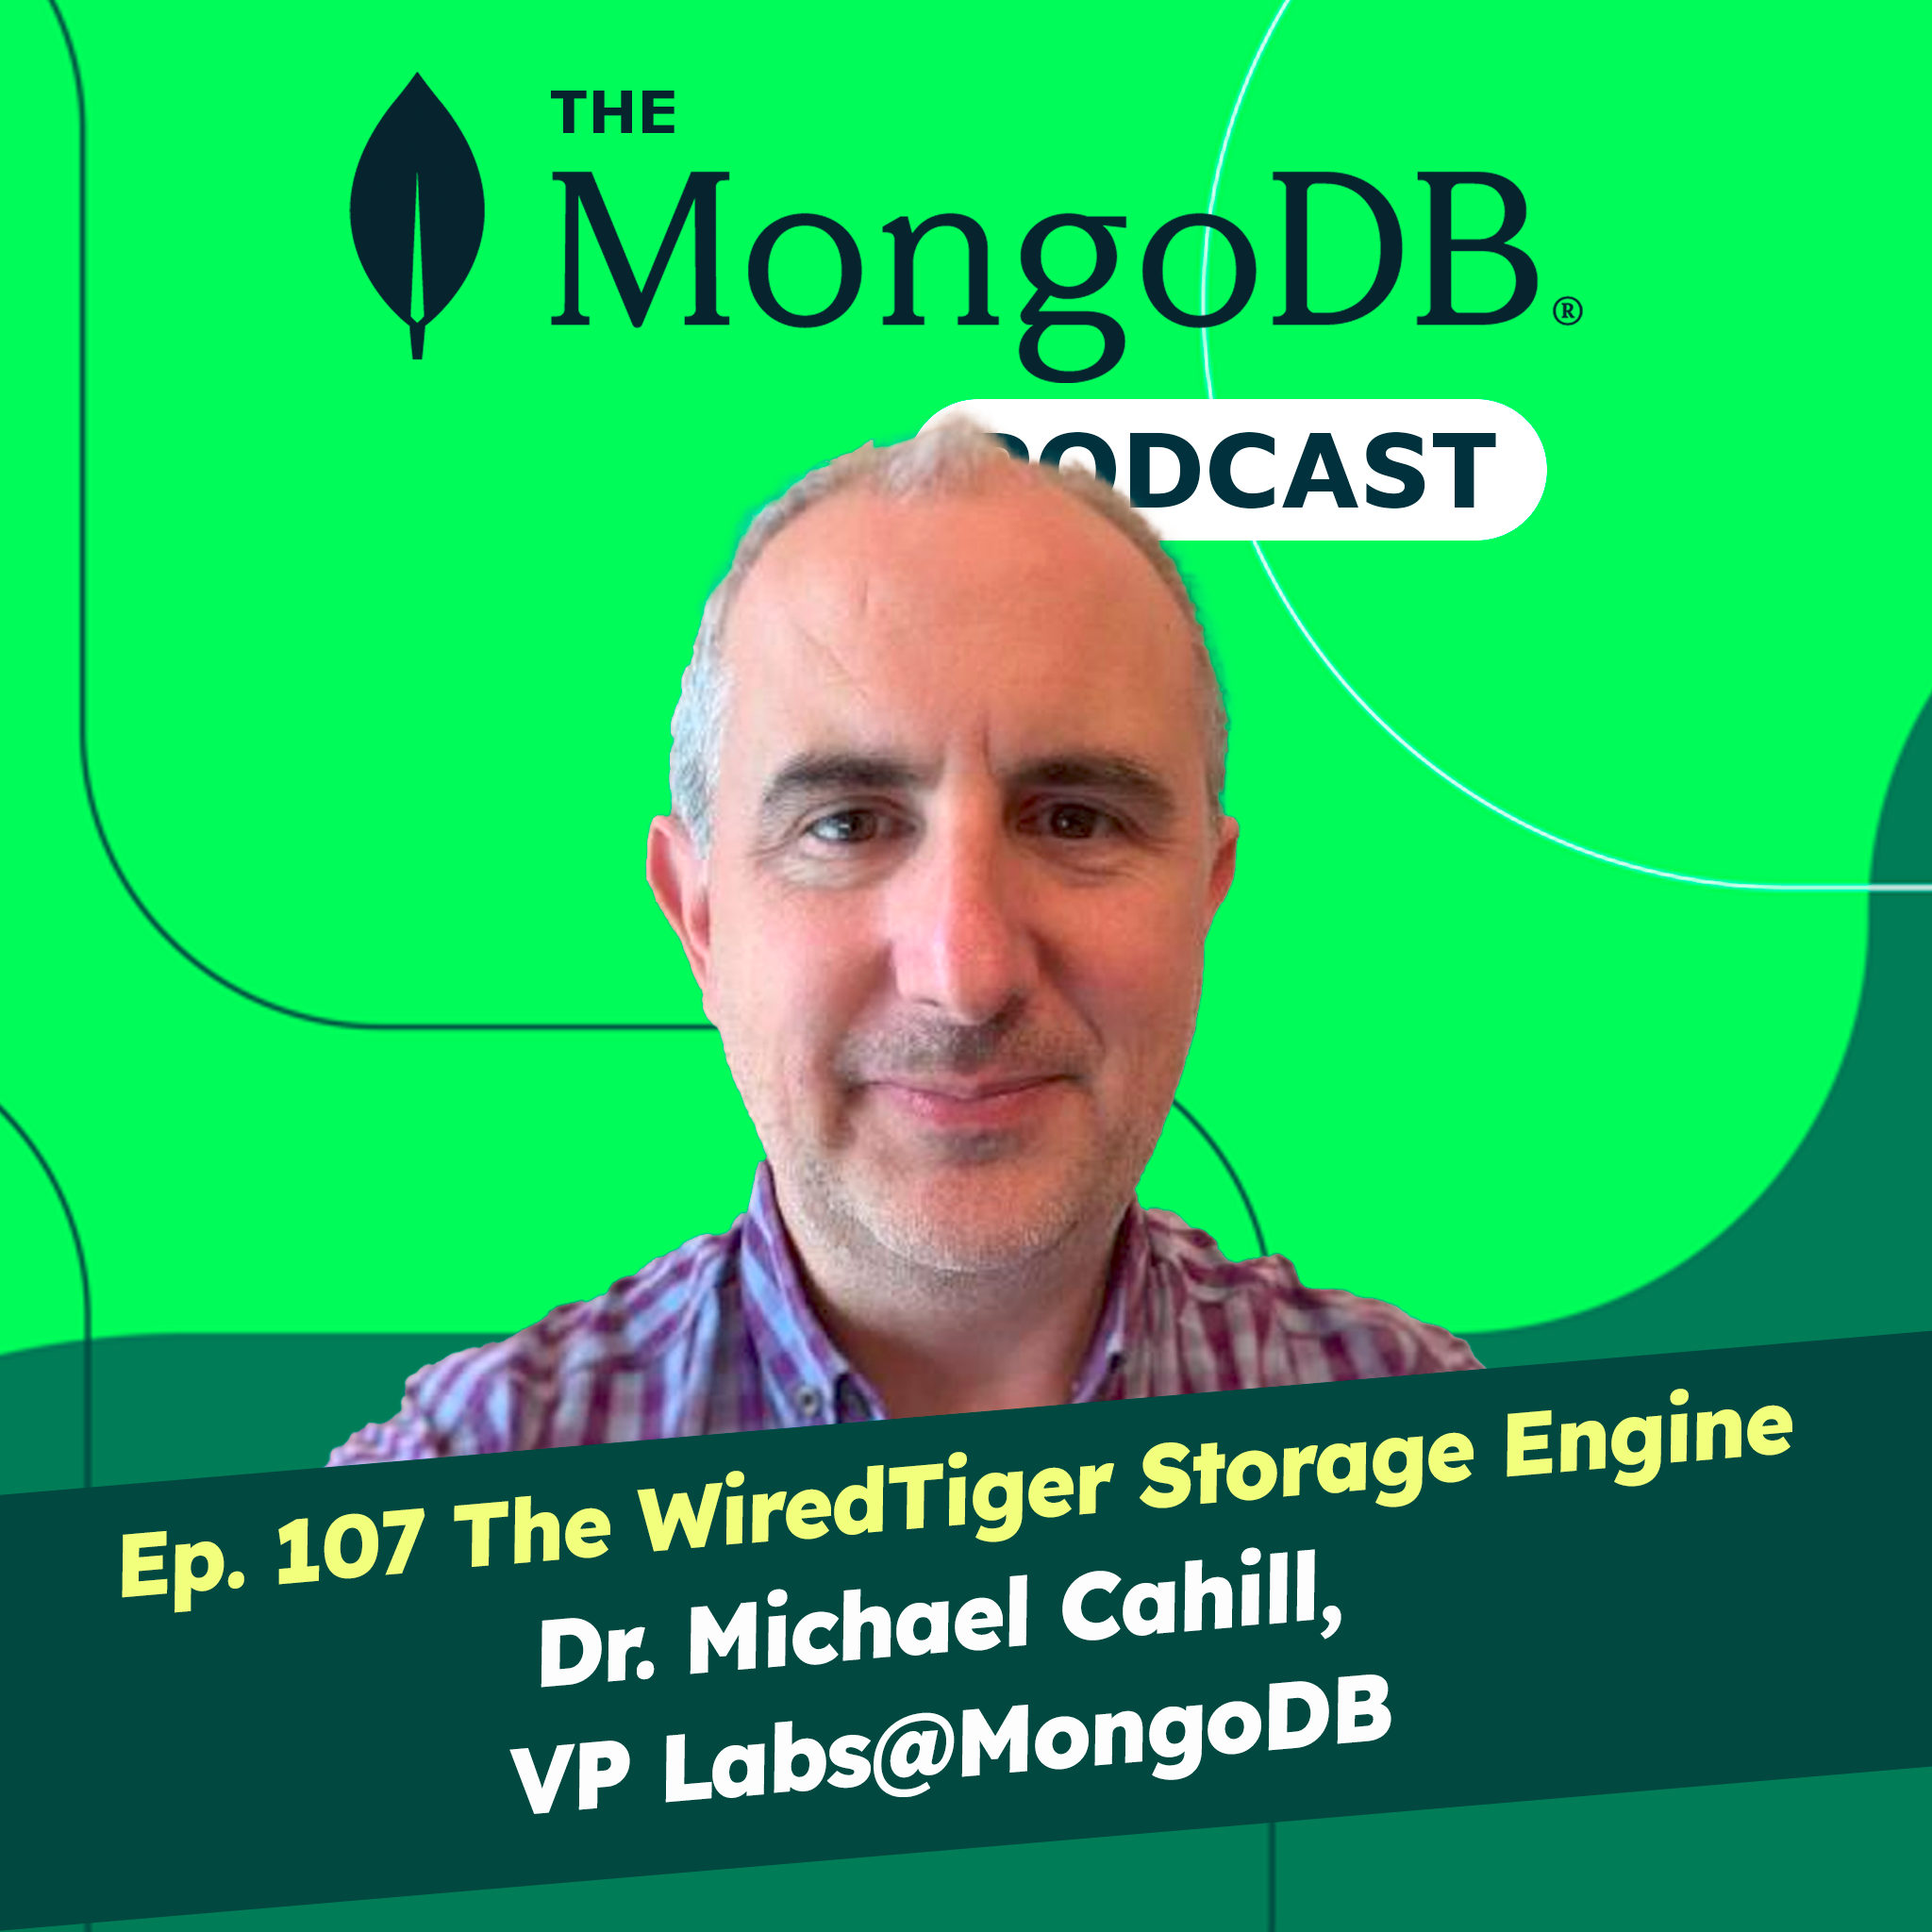 Ep. 107 Introduction to WiredTiger with Dr. Michael Cahill